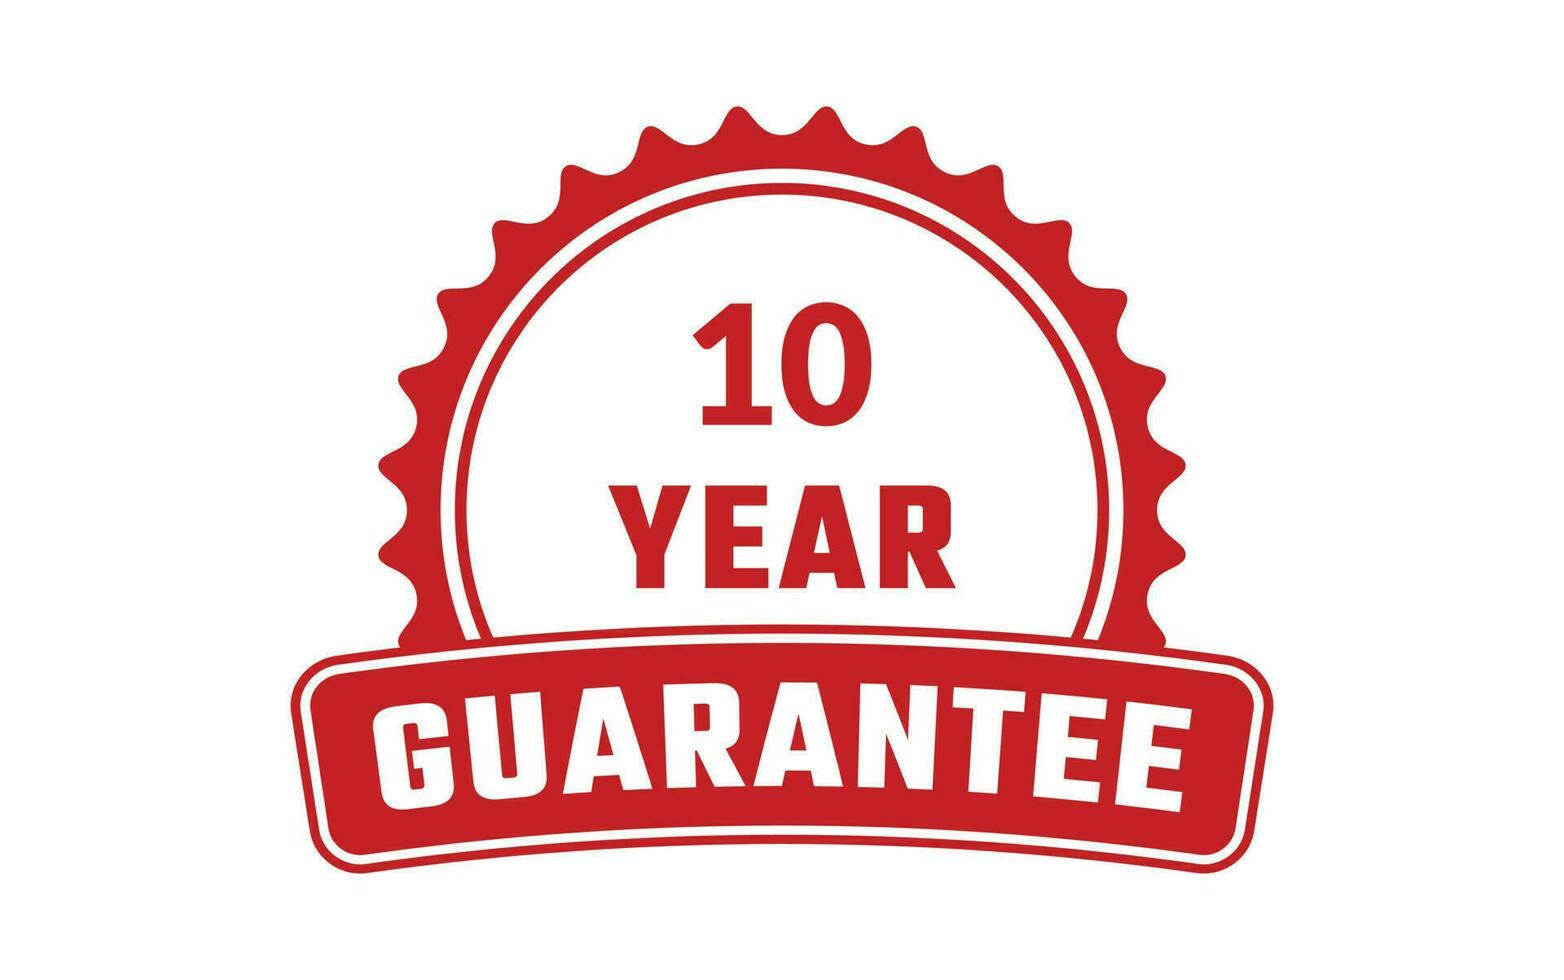 10 Year Guarantee Rubber Stamp vector